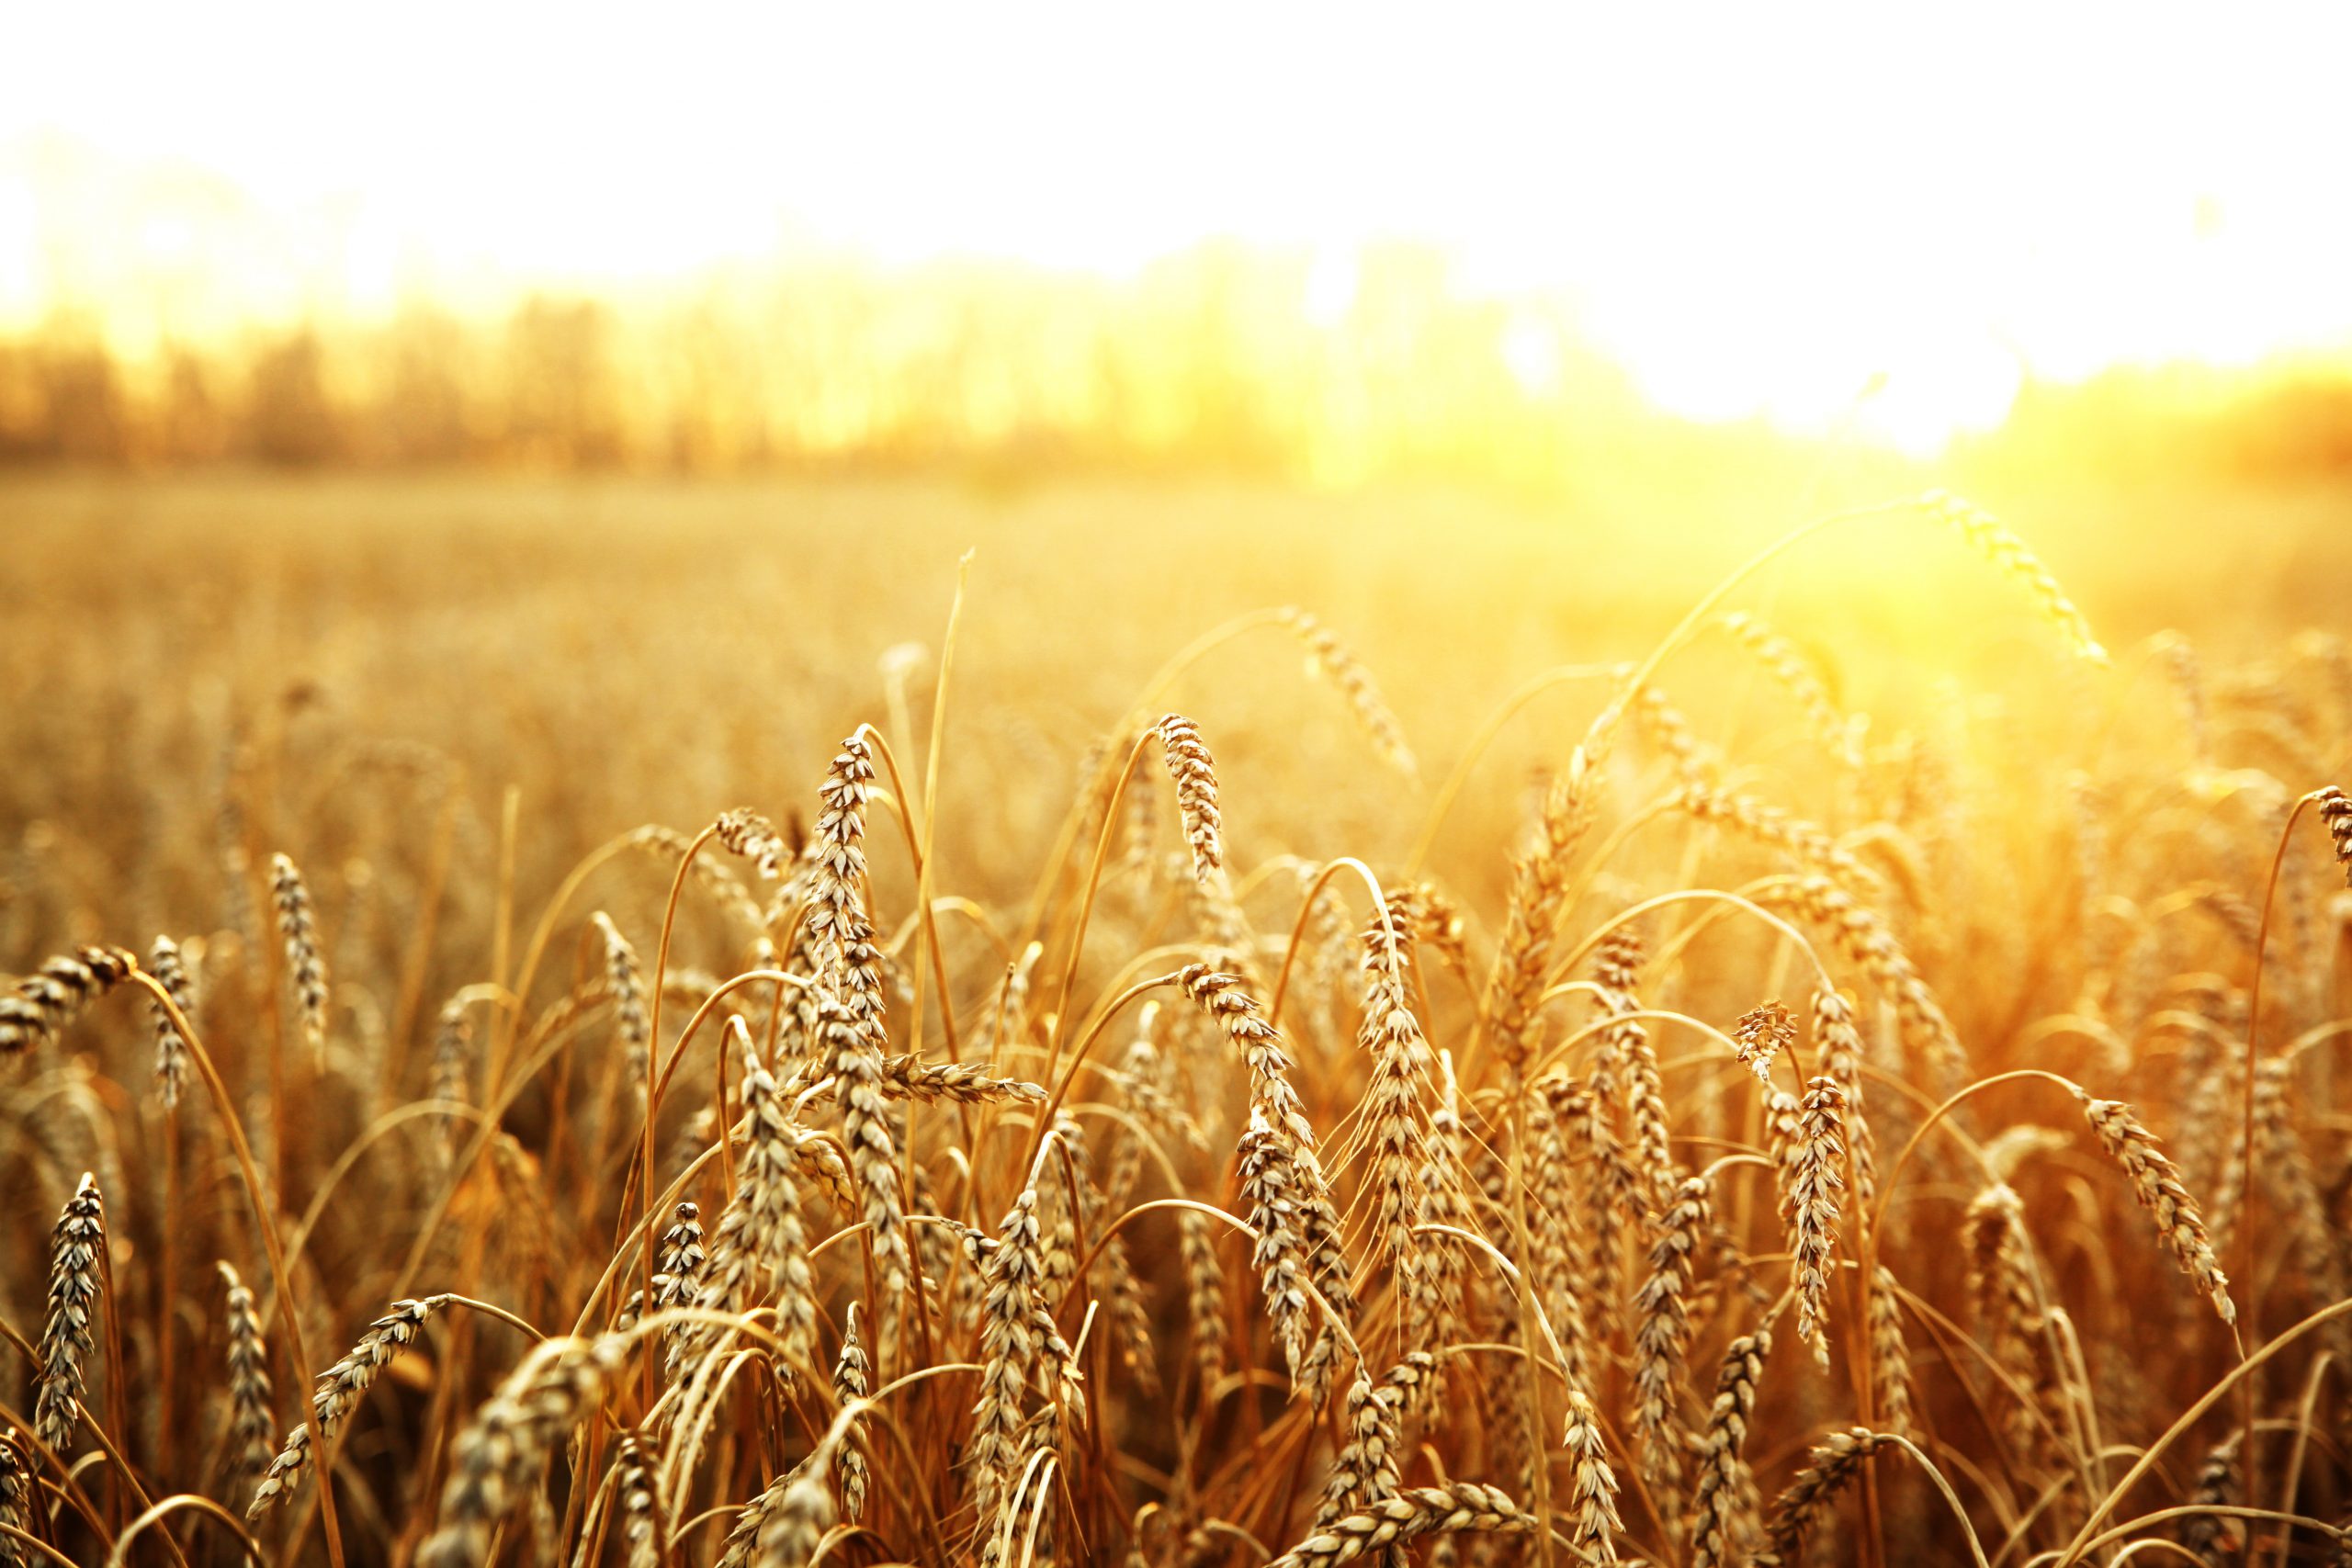 Less wheat, more oilseed on global market